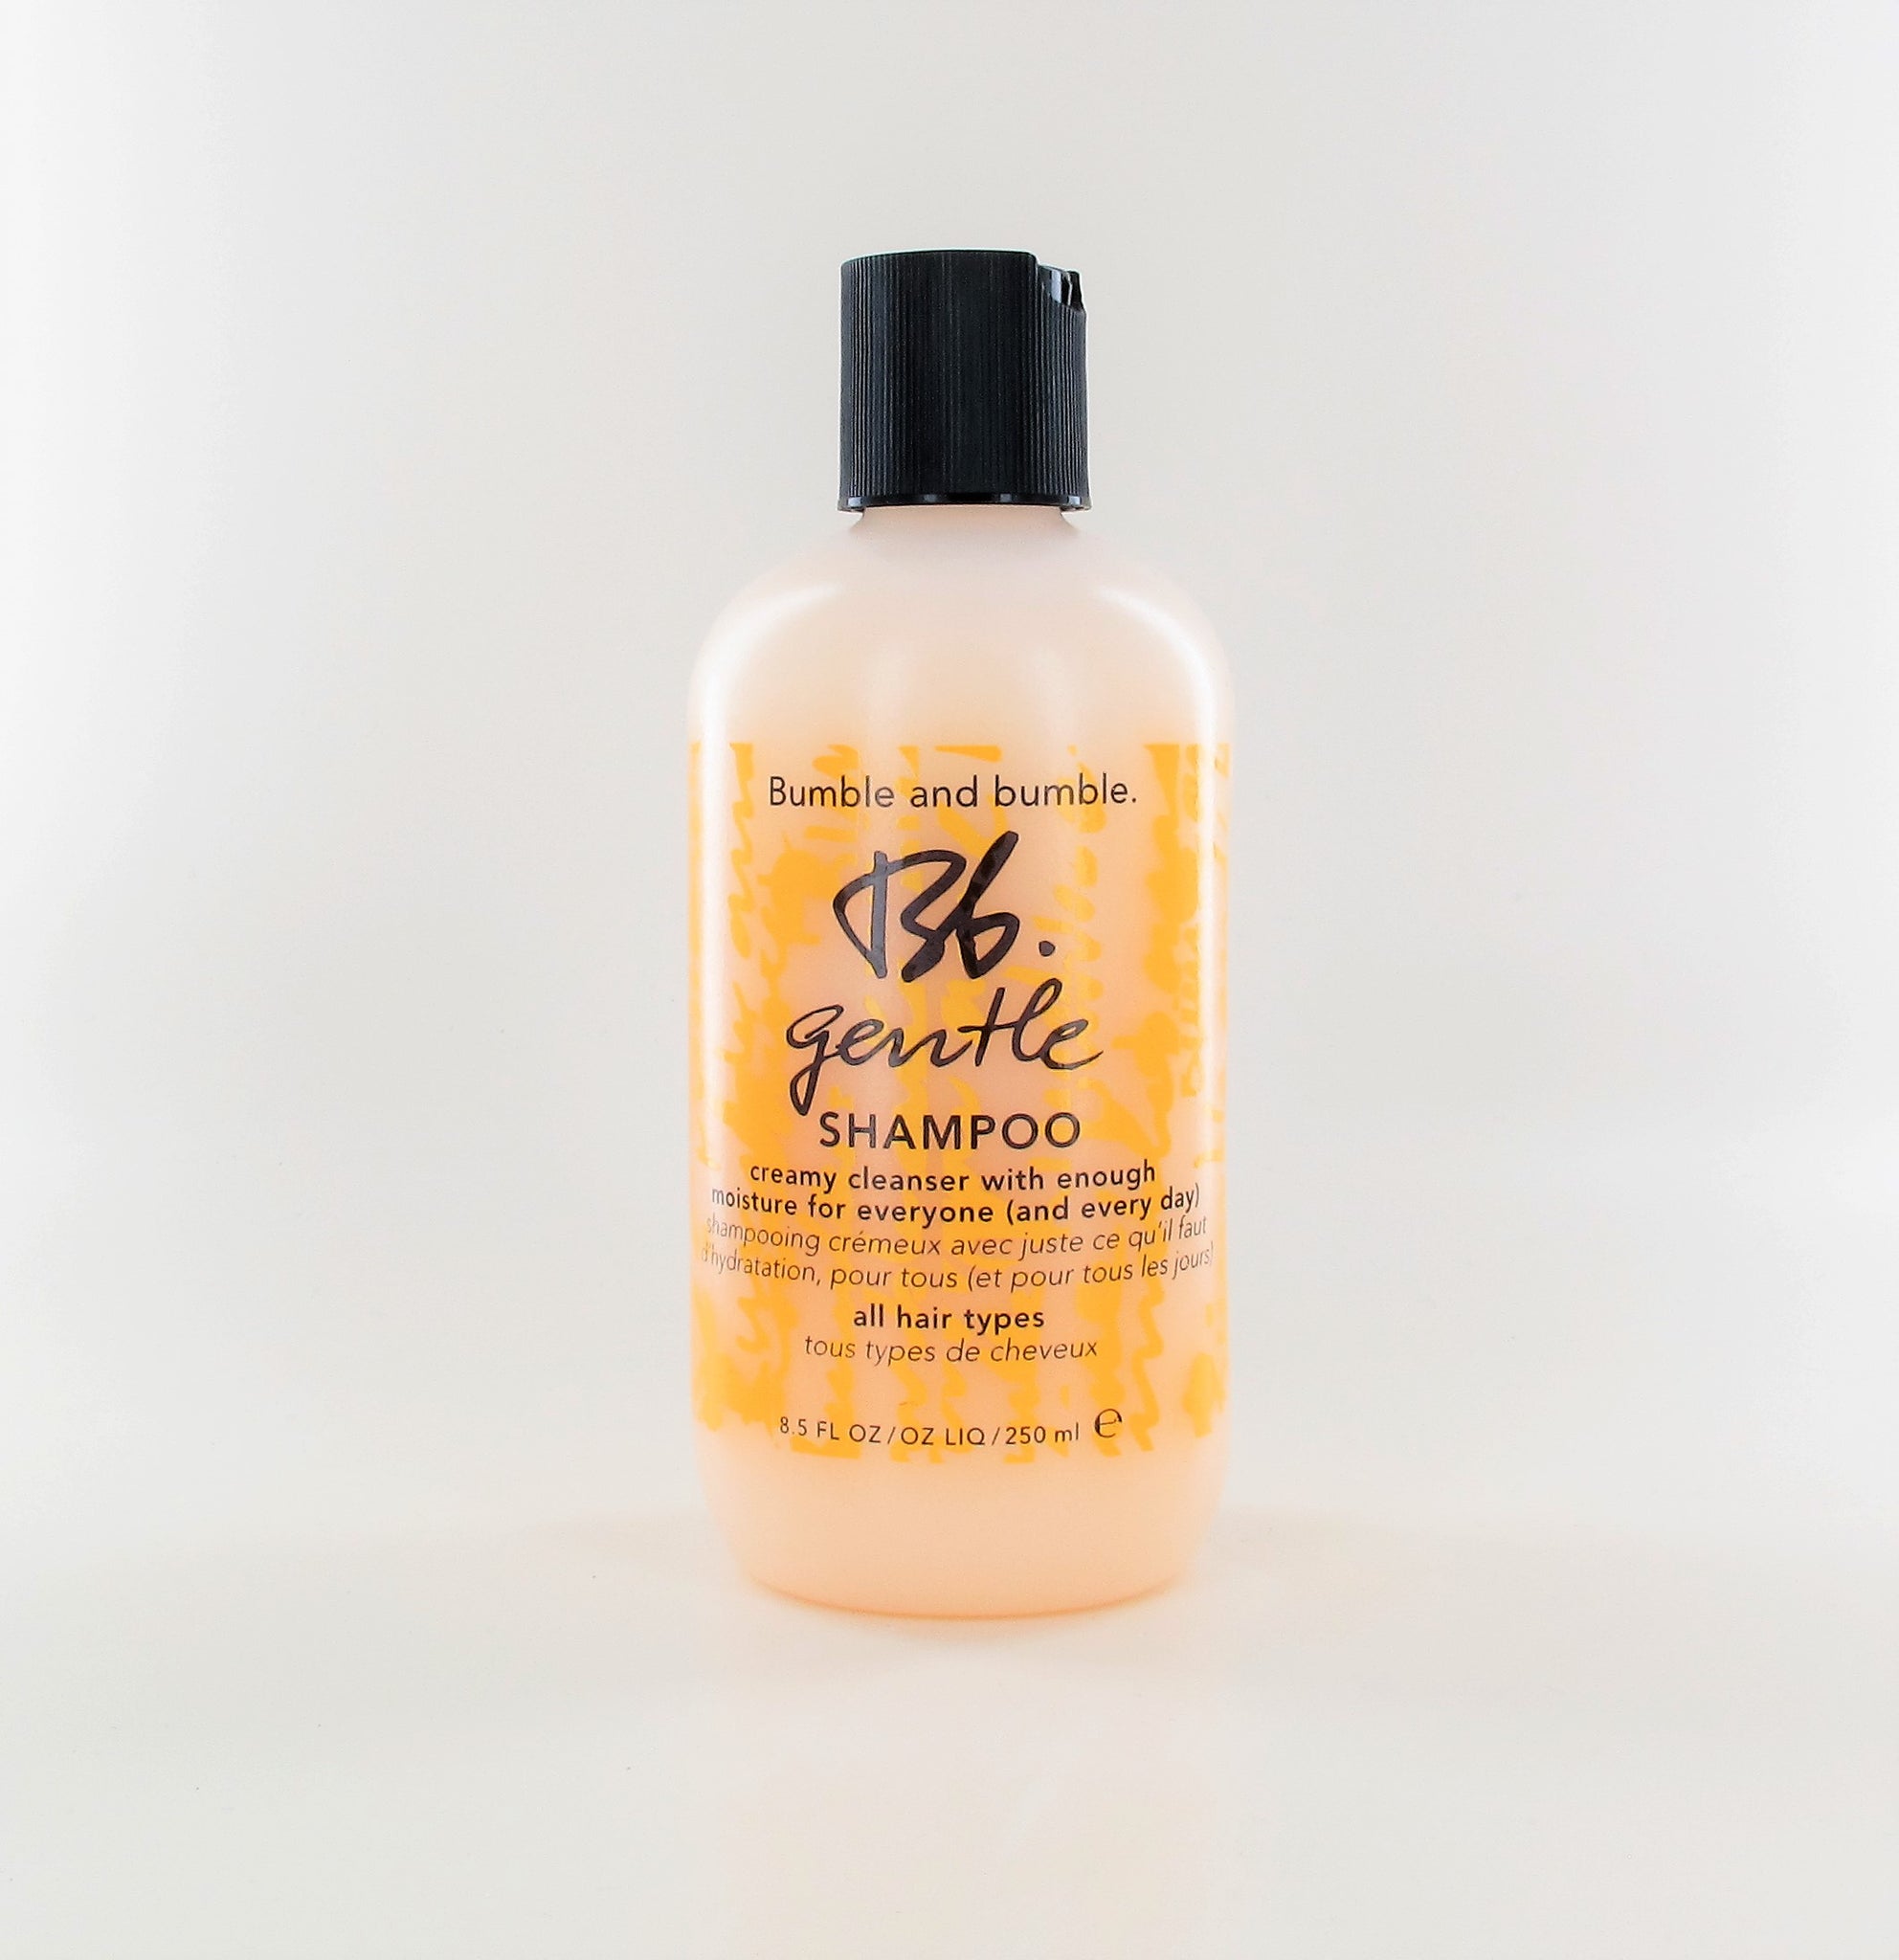 BUMBLE AND BUMBLE Gentle Shampoo 8.5 oz